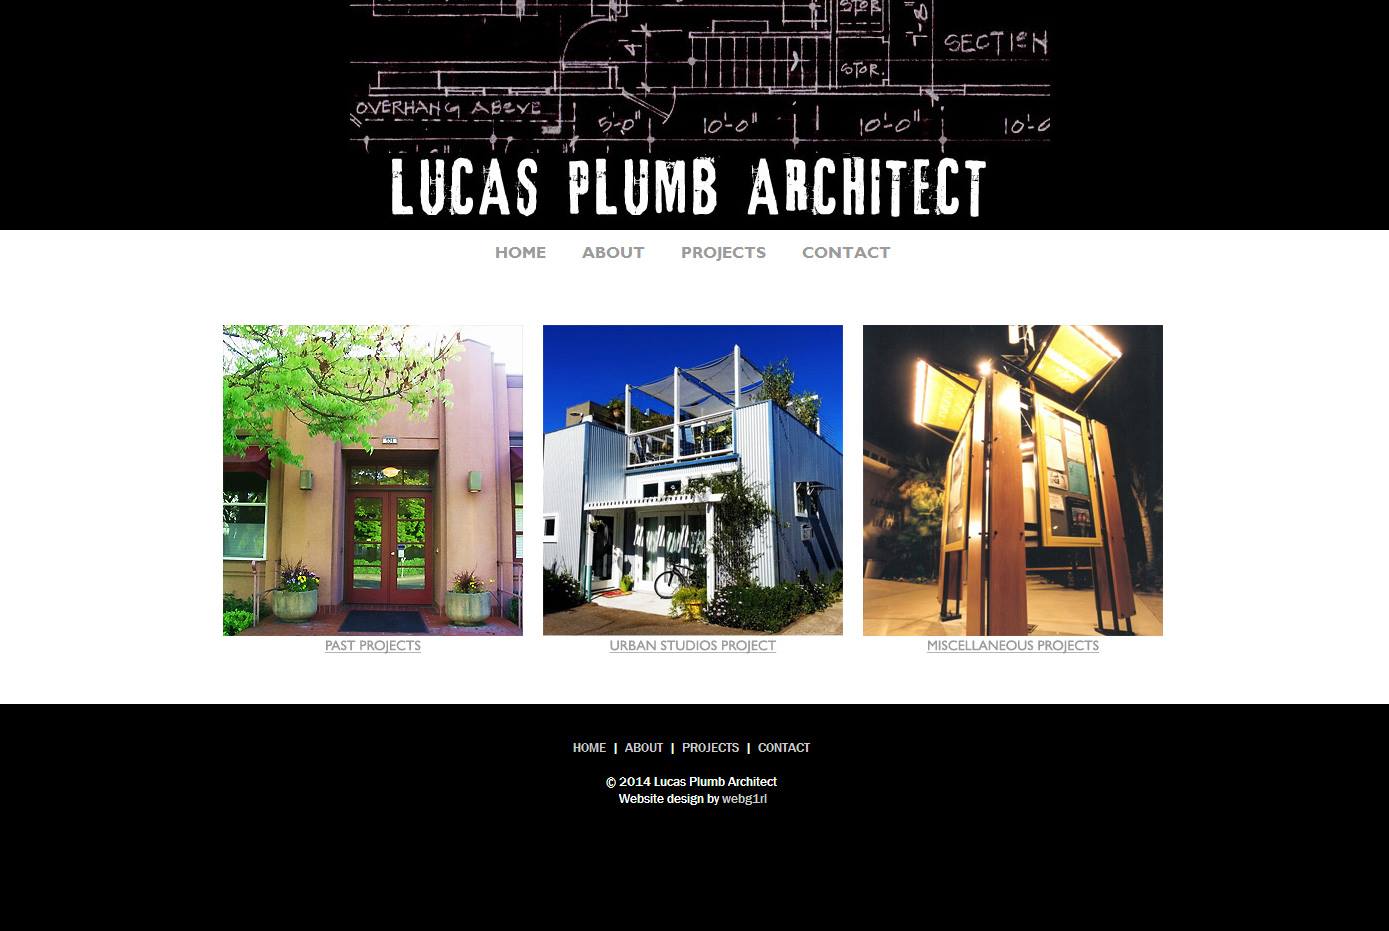 Lucas Plumb Architect - Coded in HTML